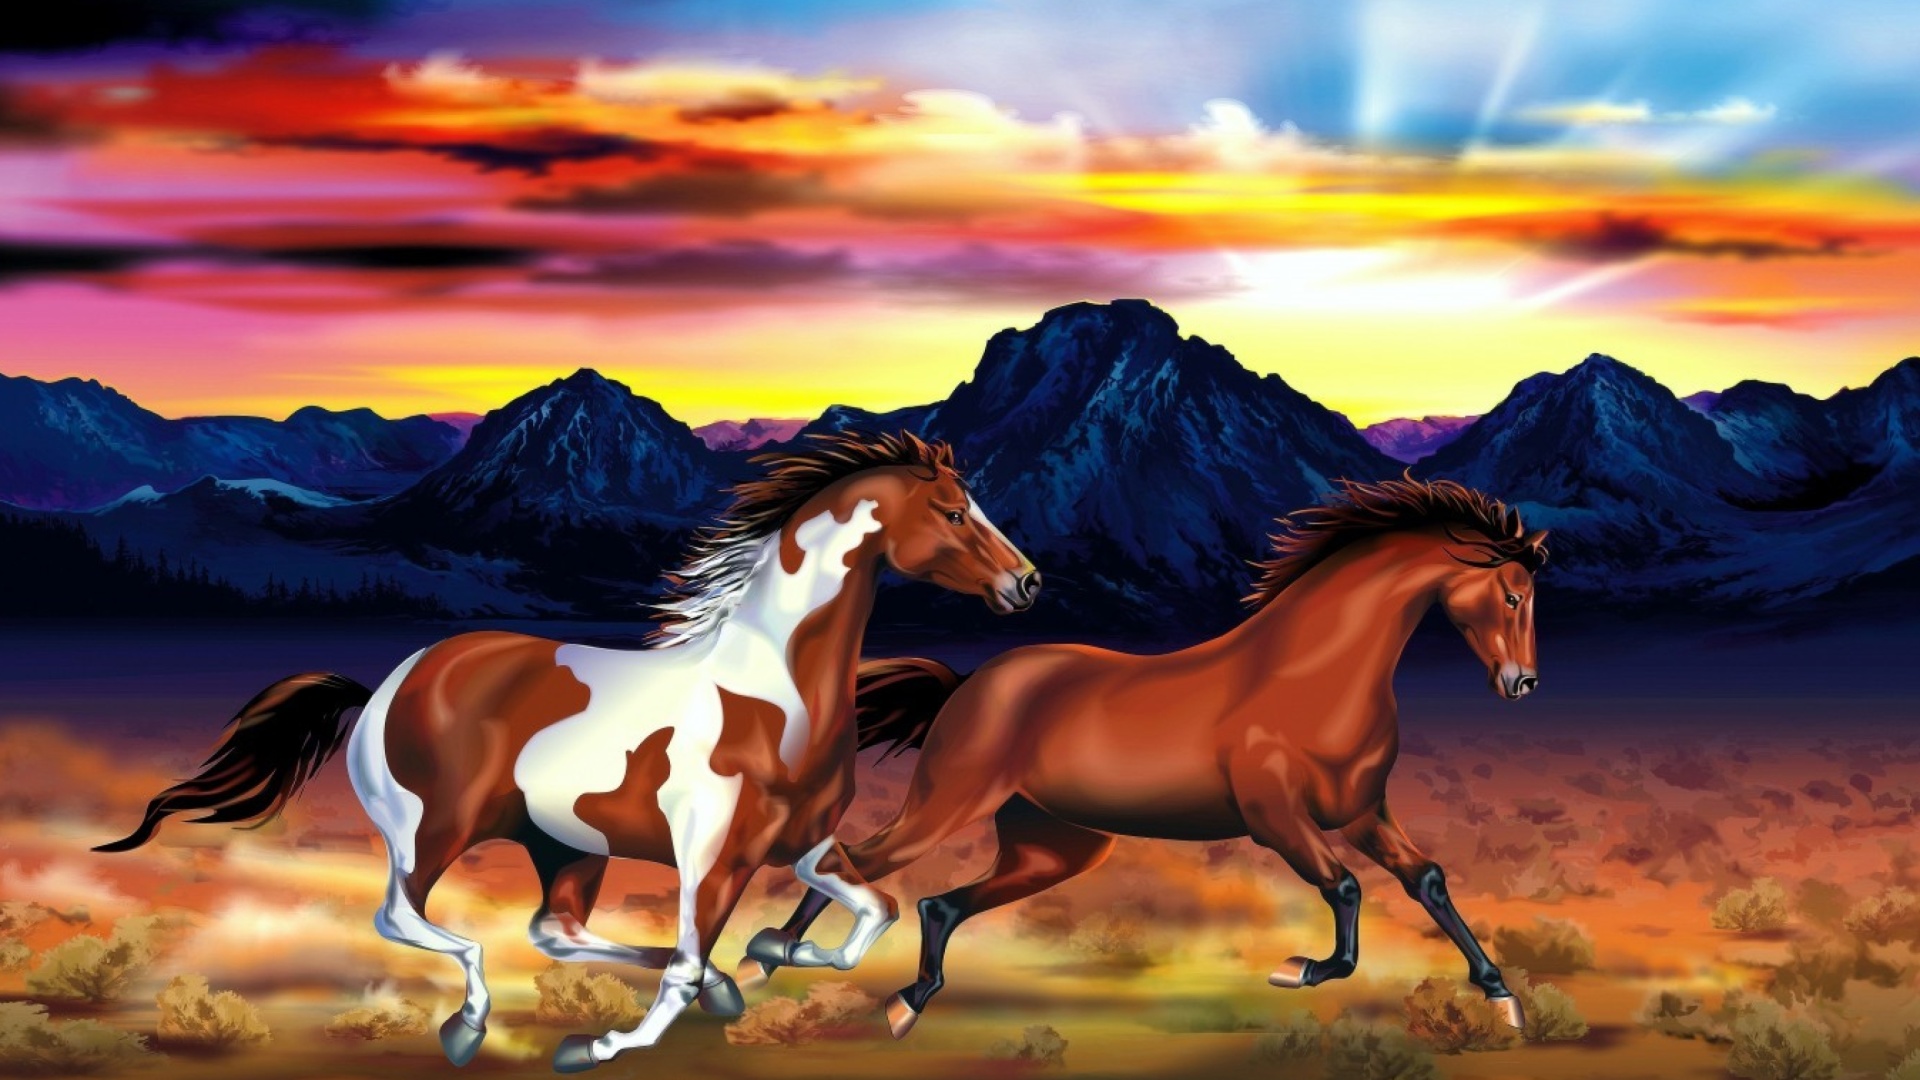 Painting with horses wallpaper 1920x1080